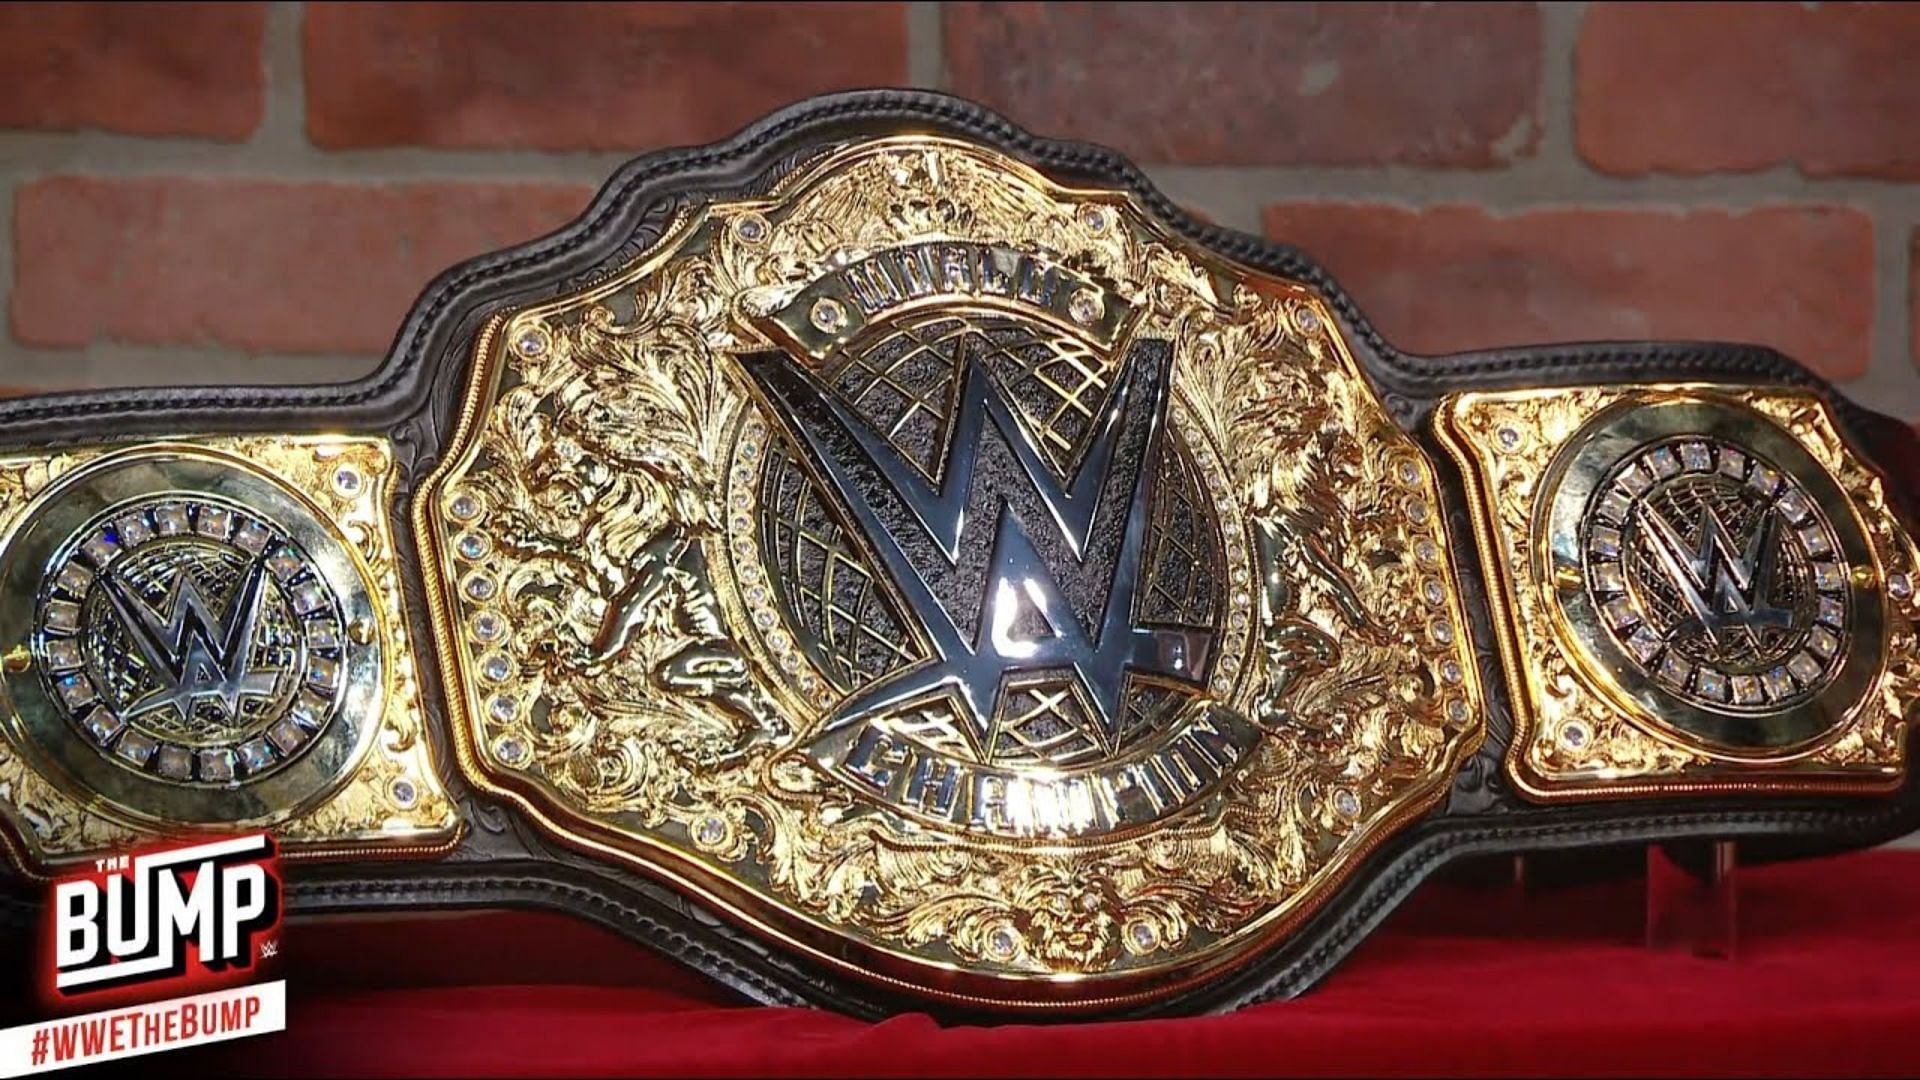 A new World Heavyweight Champion will be crowned at Night of Champions 2023!